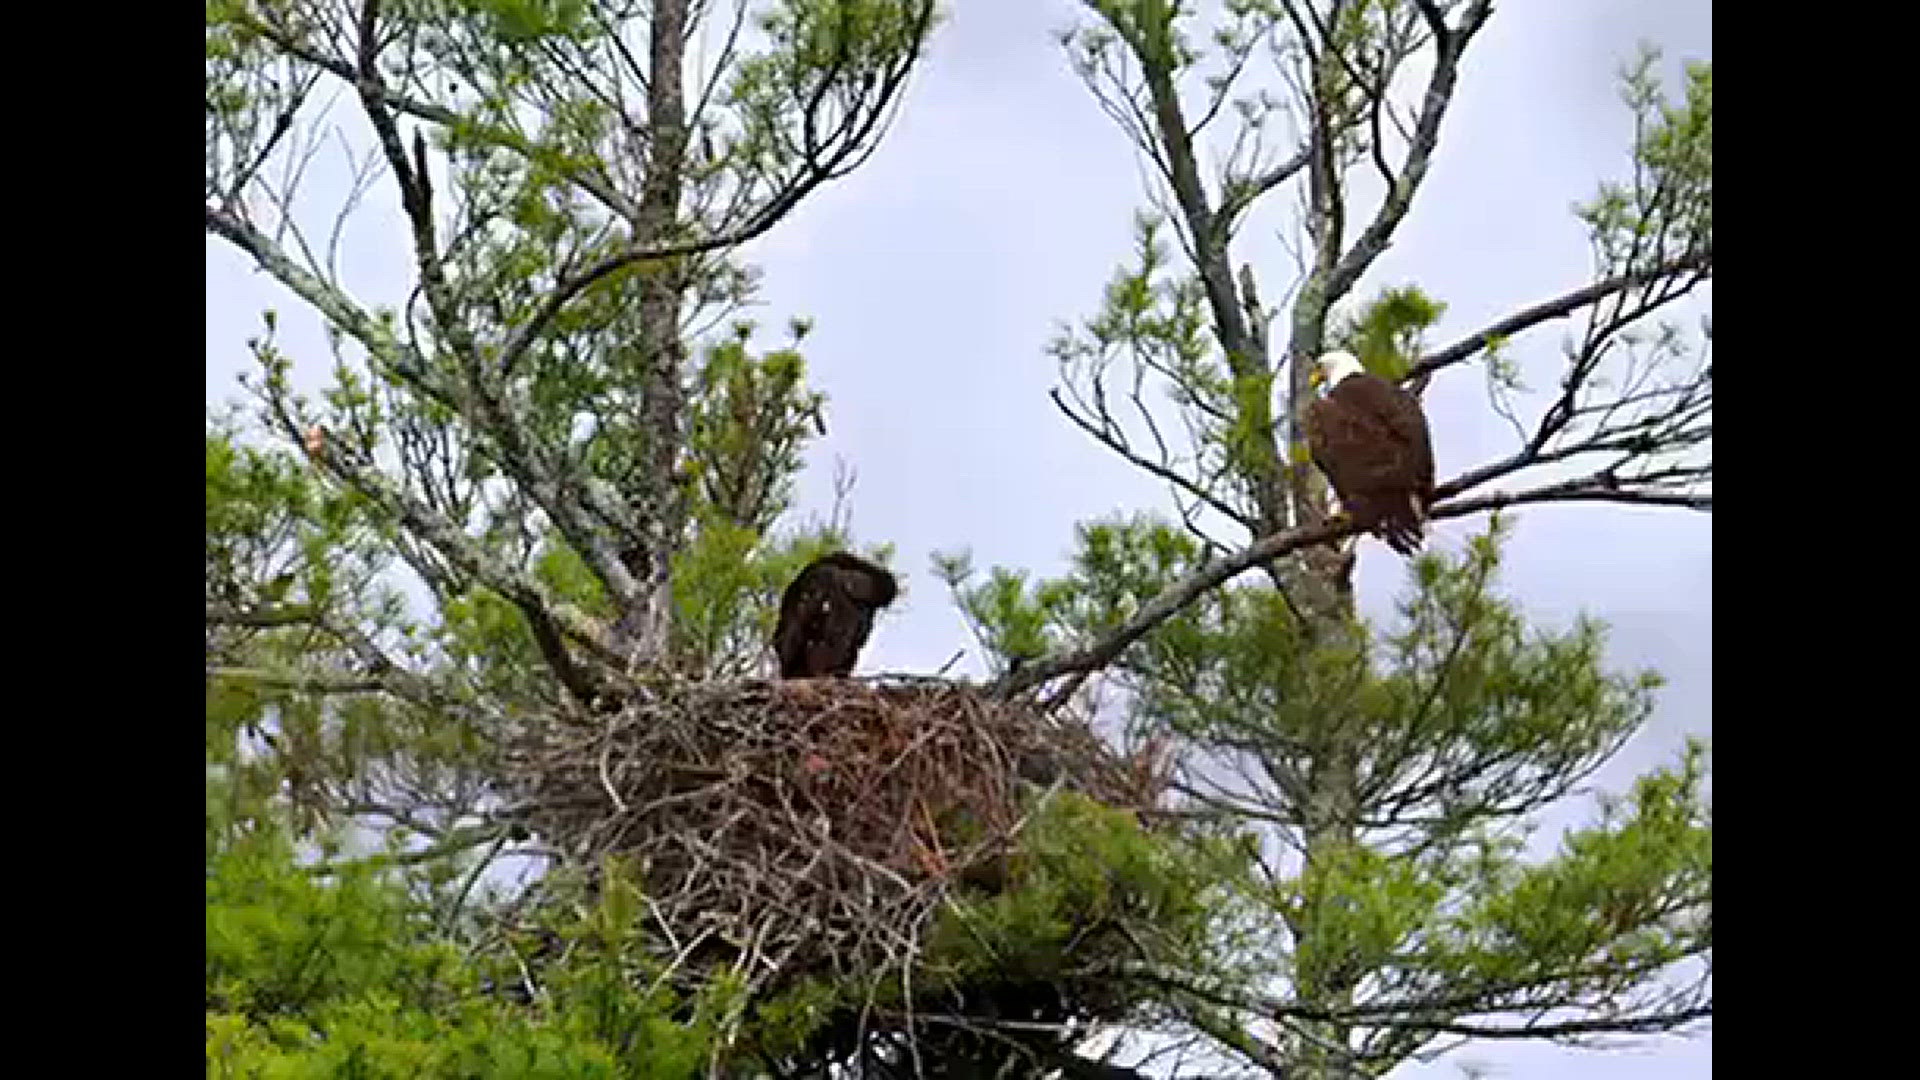 Mom was helping this Eaglet clean up her lunch.
Credit: Gary Manzo